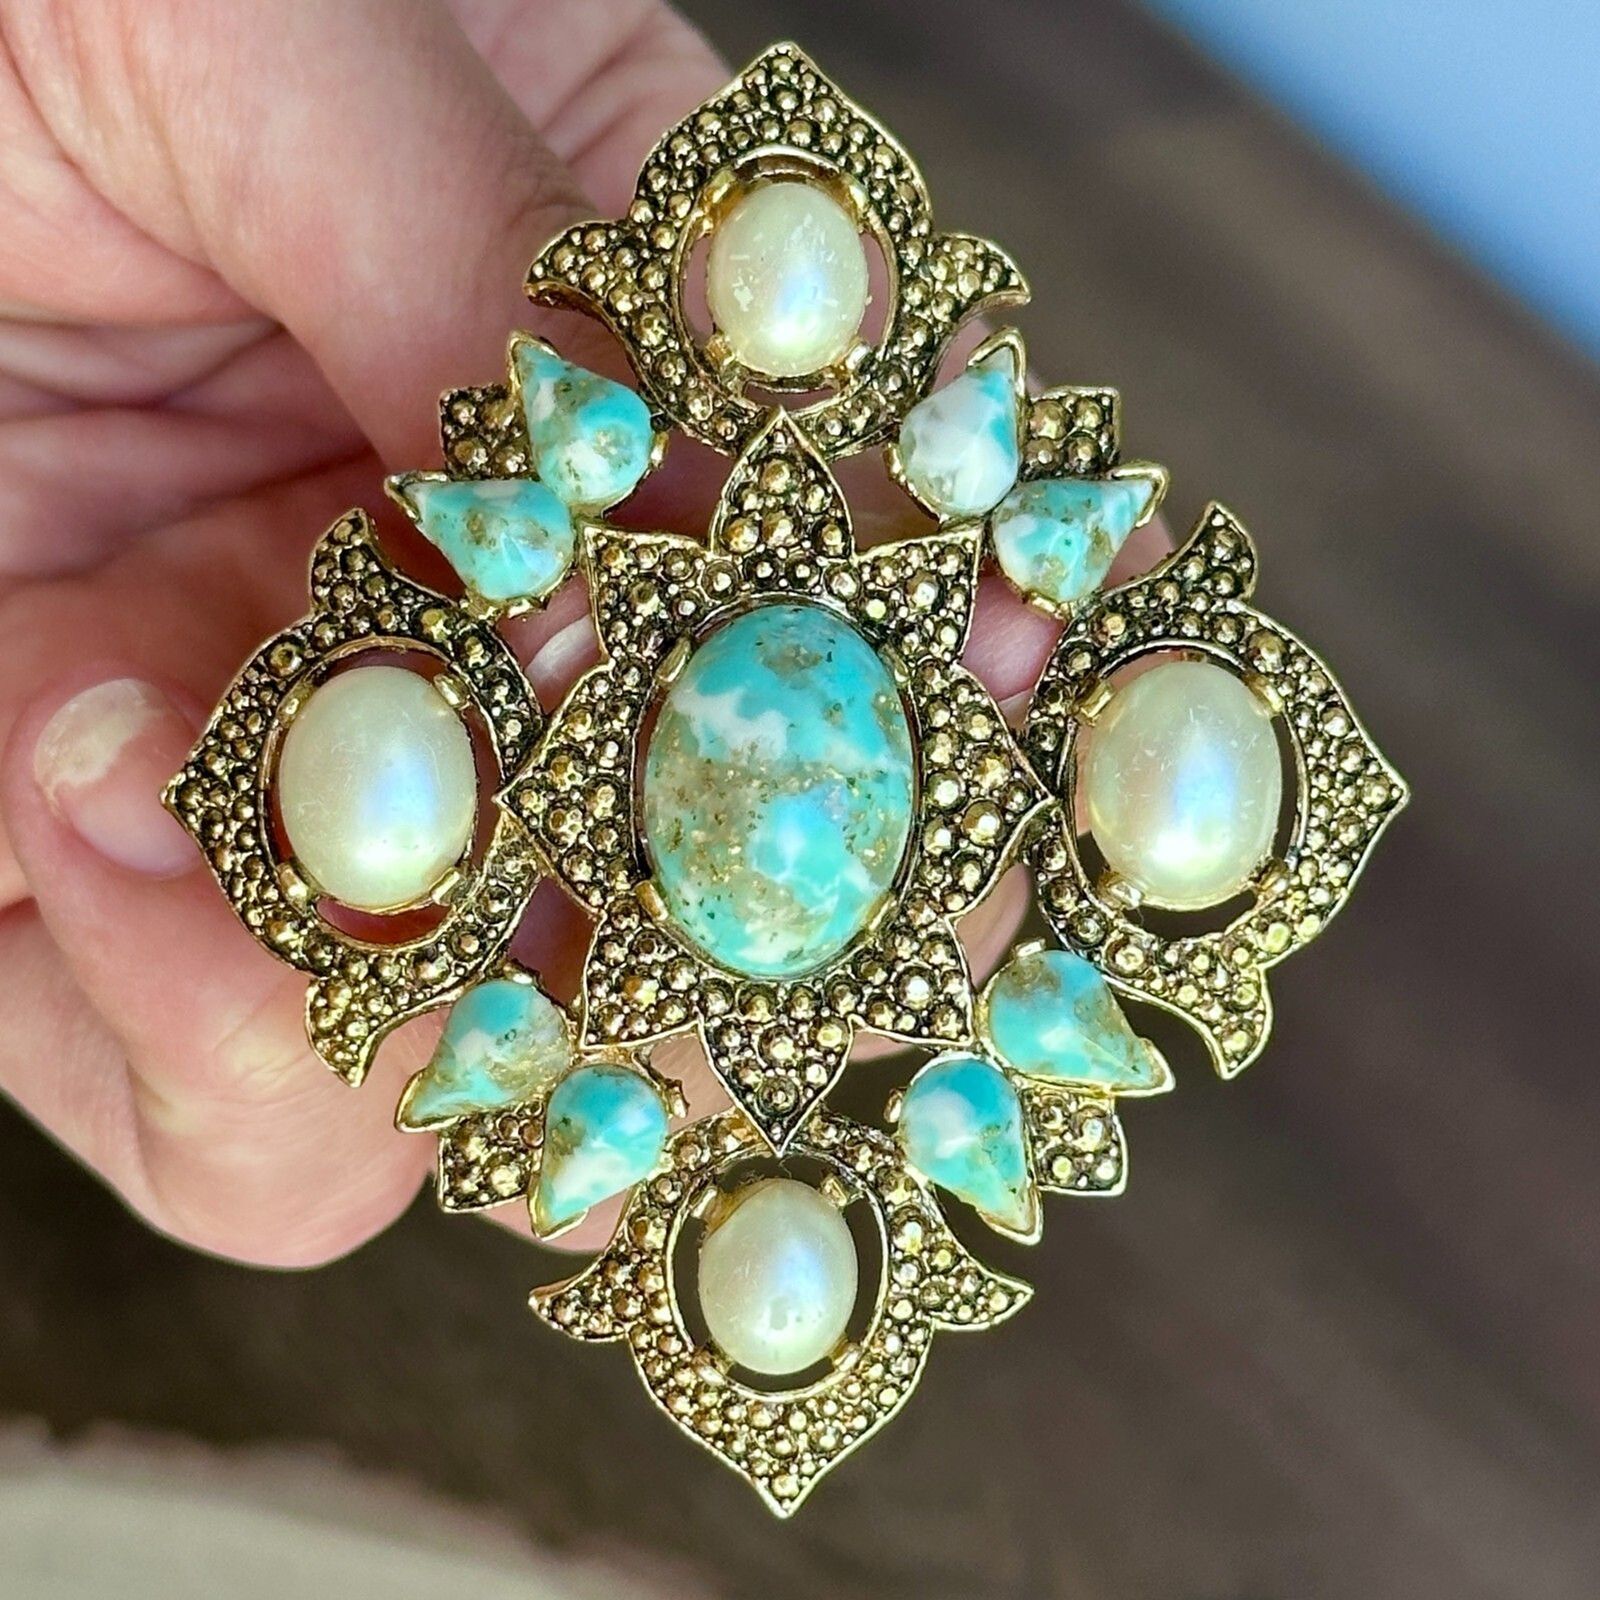 VINTAGE Sarah Coventry 1968 Remembrance Collection Brooch Faux Turquoise Pearl